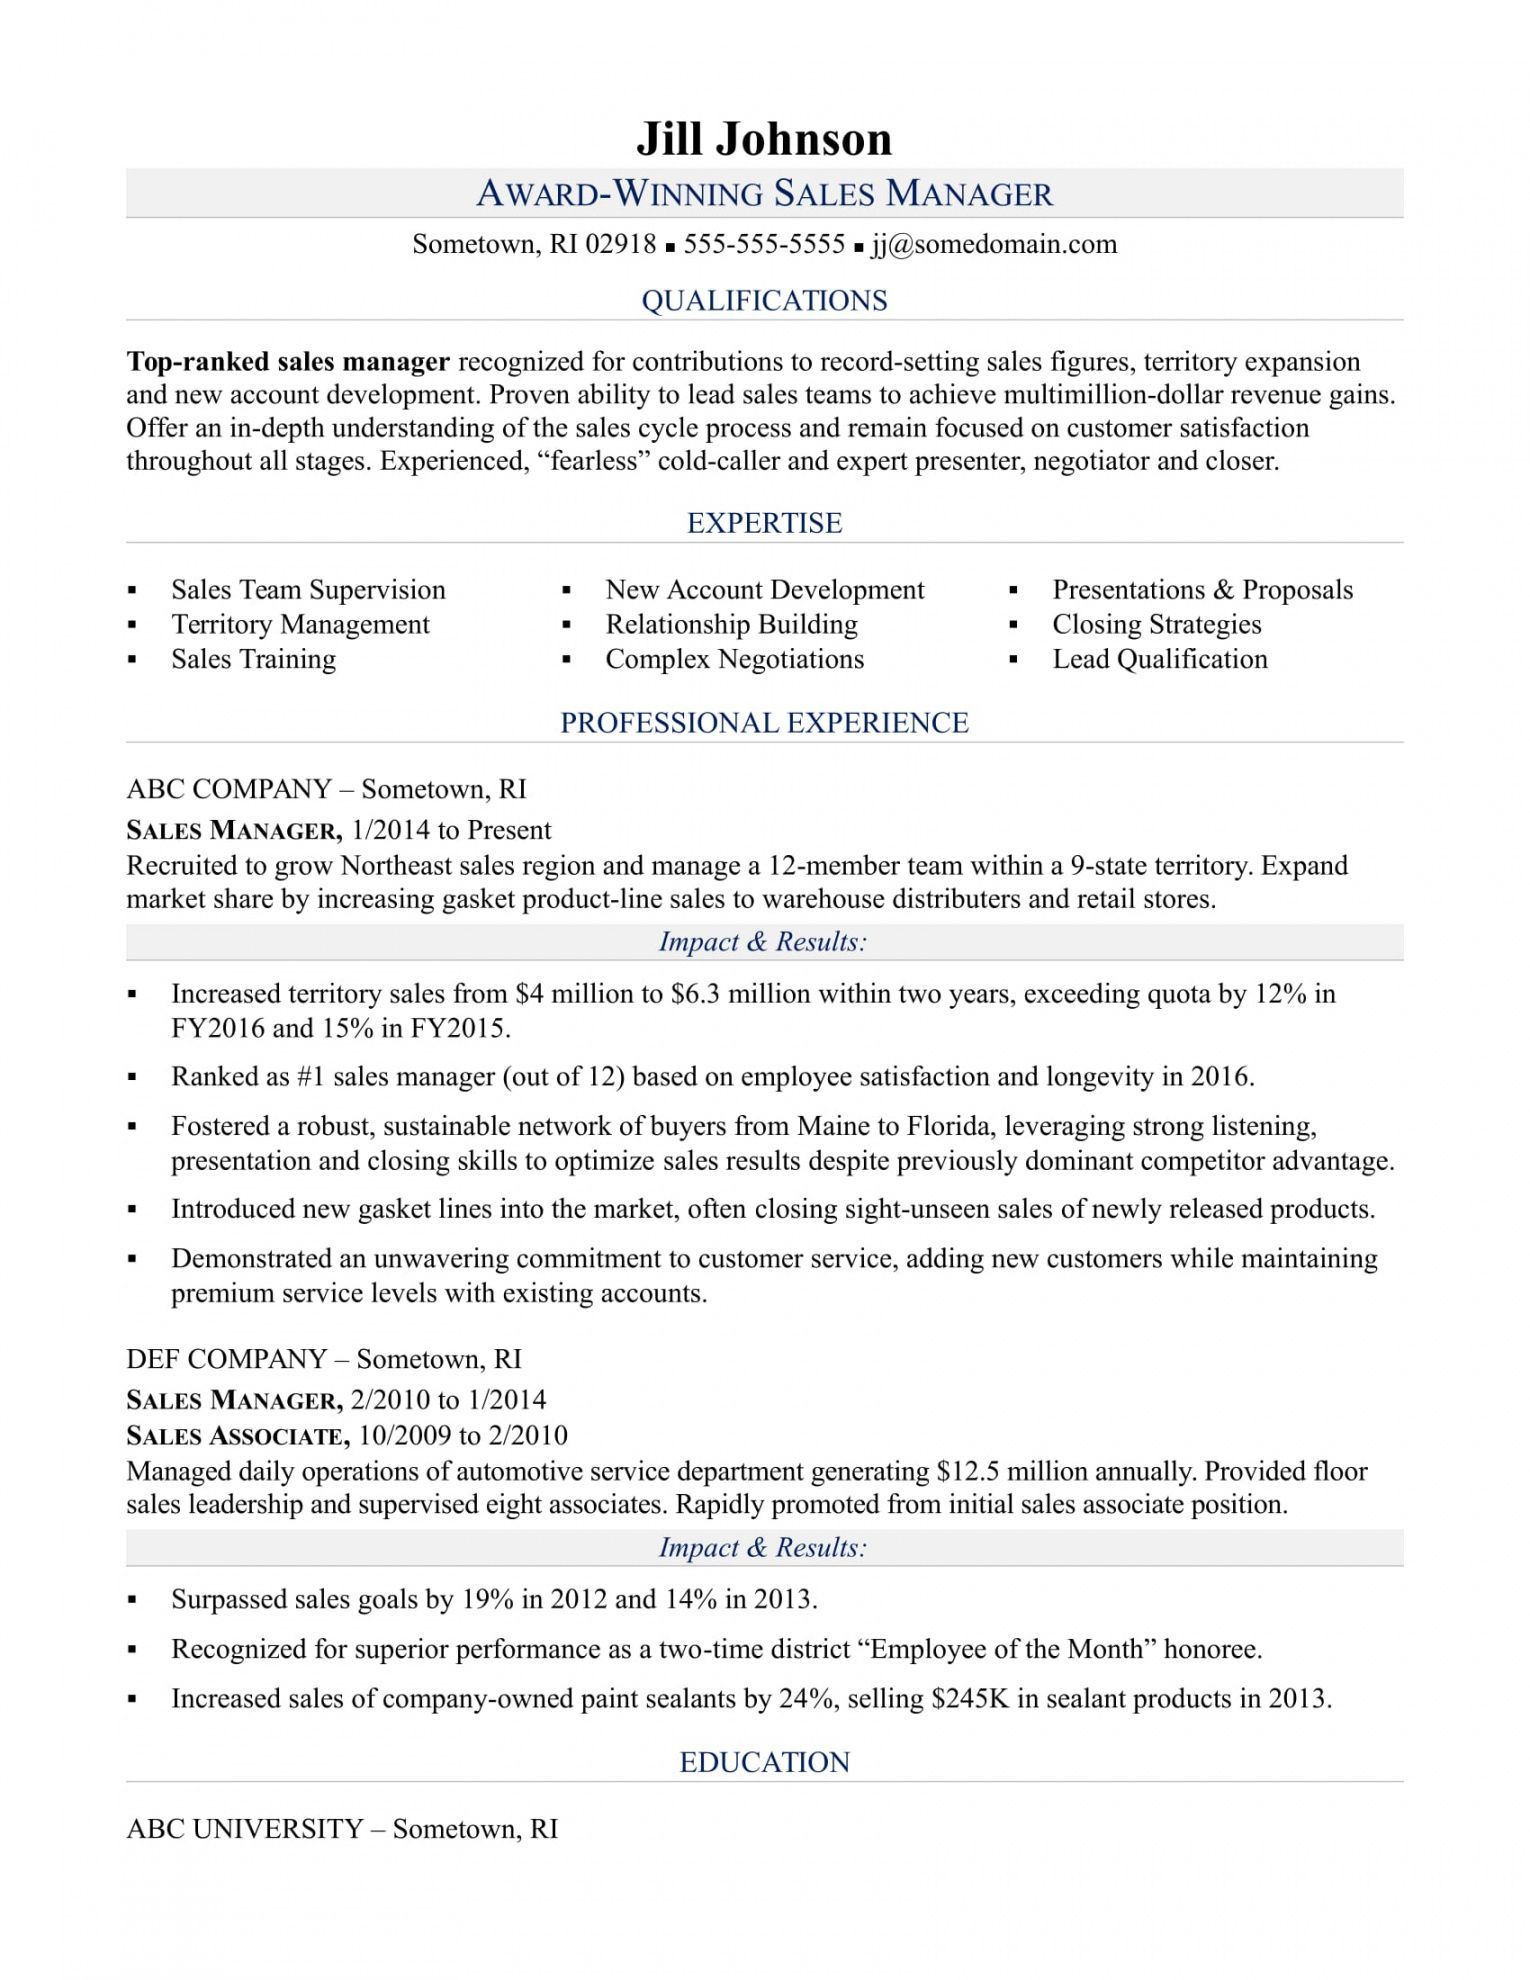 Management Position Resume Template Sales Resume Manager Resume Job Resume Examples